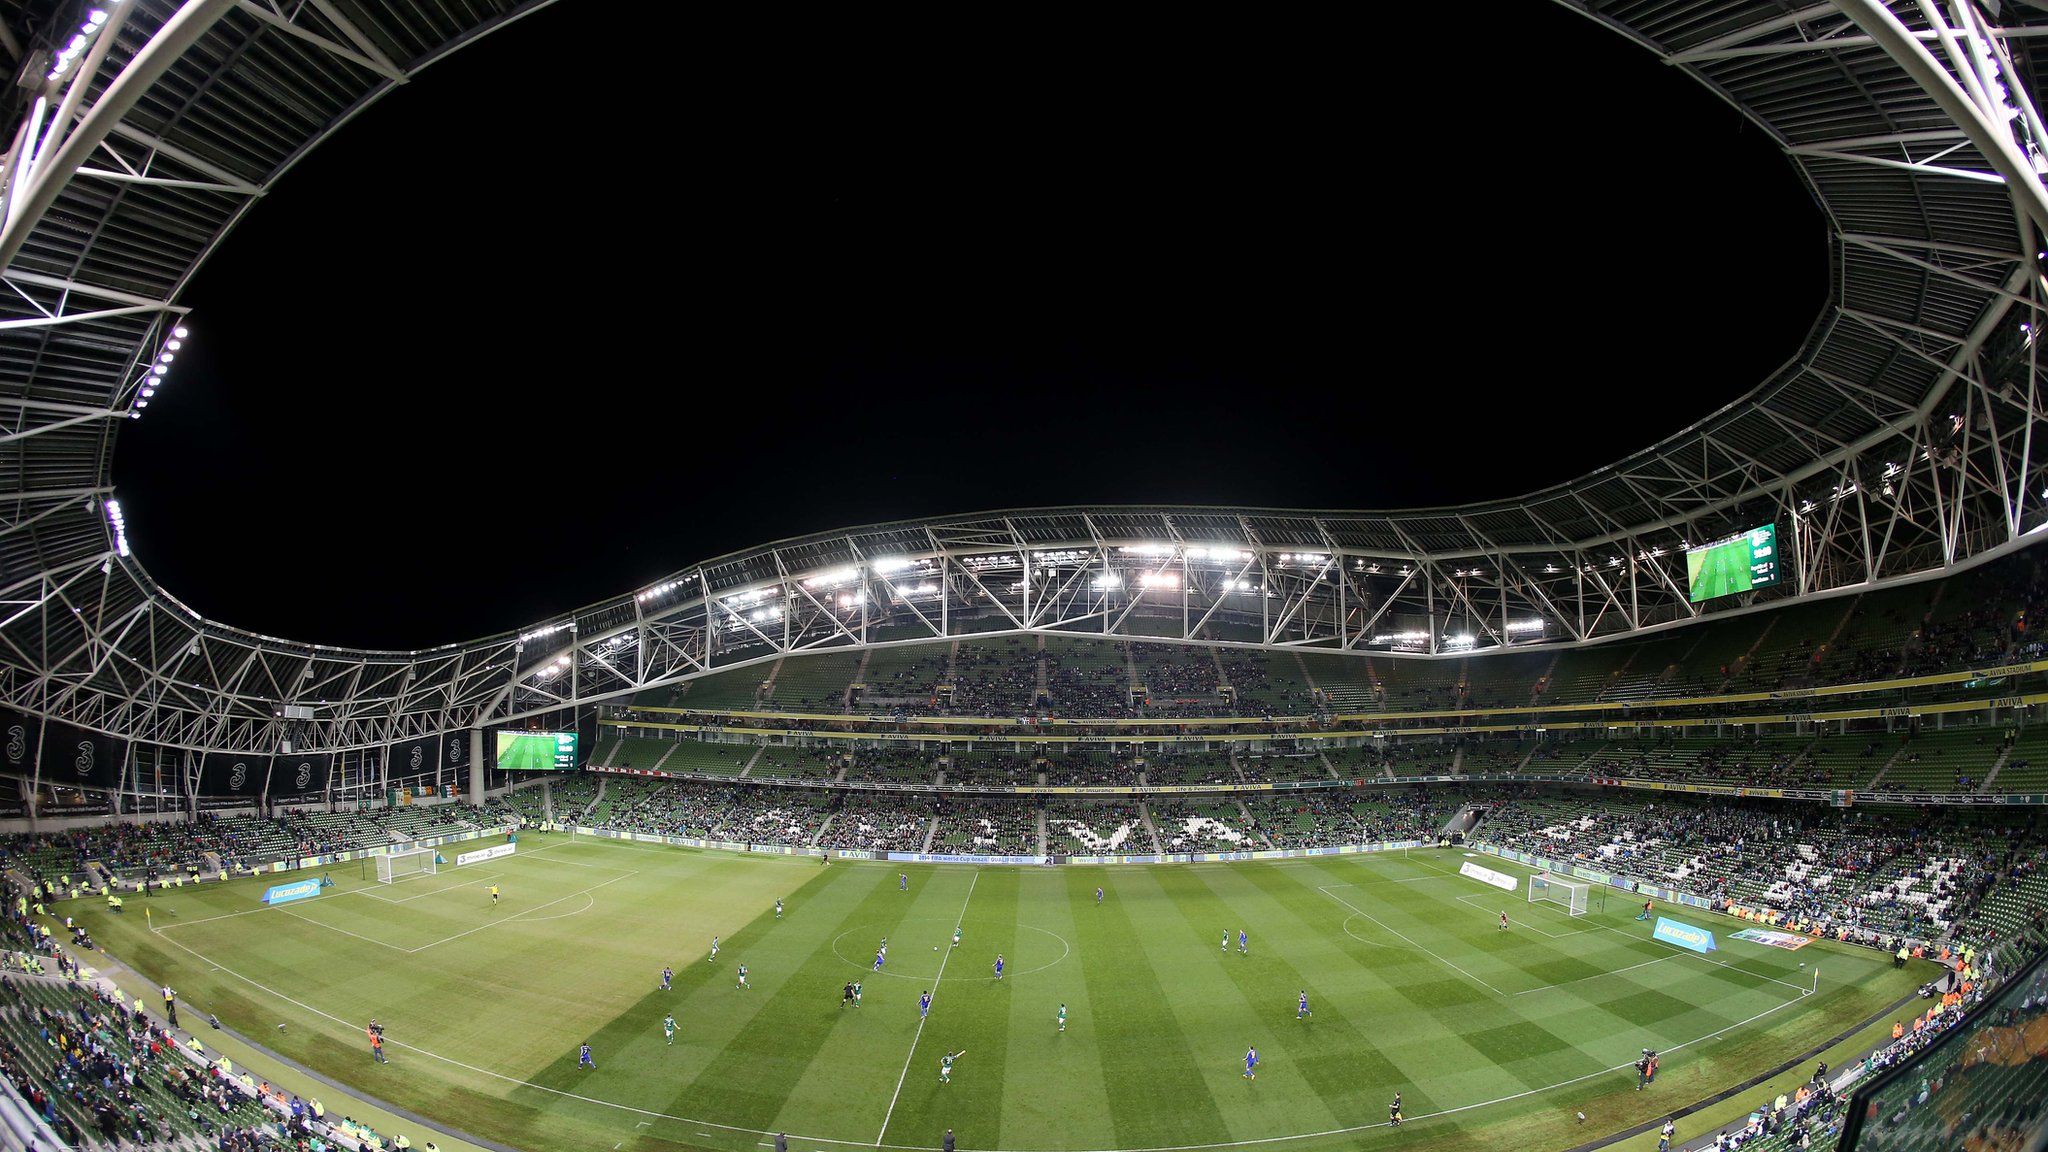 Dublin's Aviva Stadium in scheduled to host next Sunday's Nations League football game between the Republic of Ireland and Wales